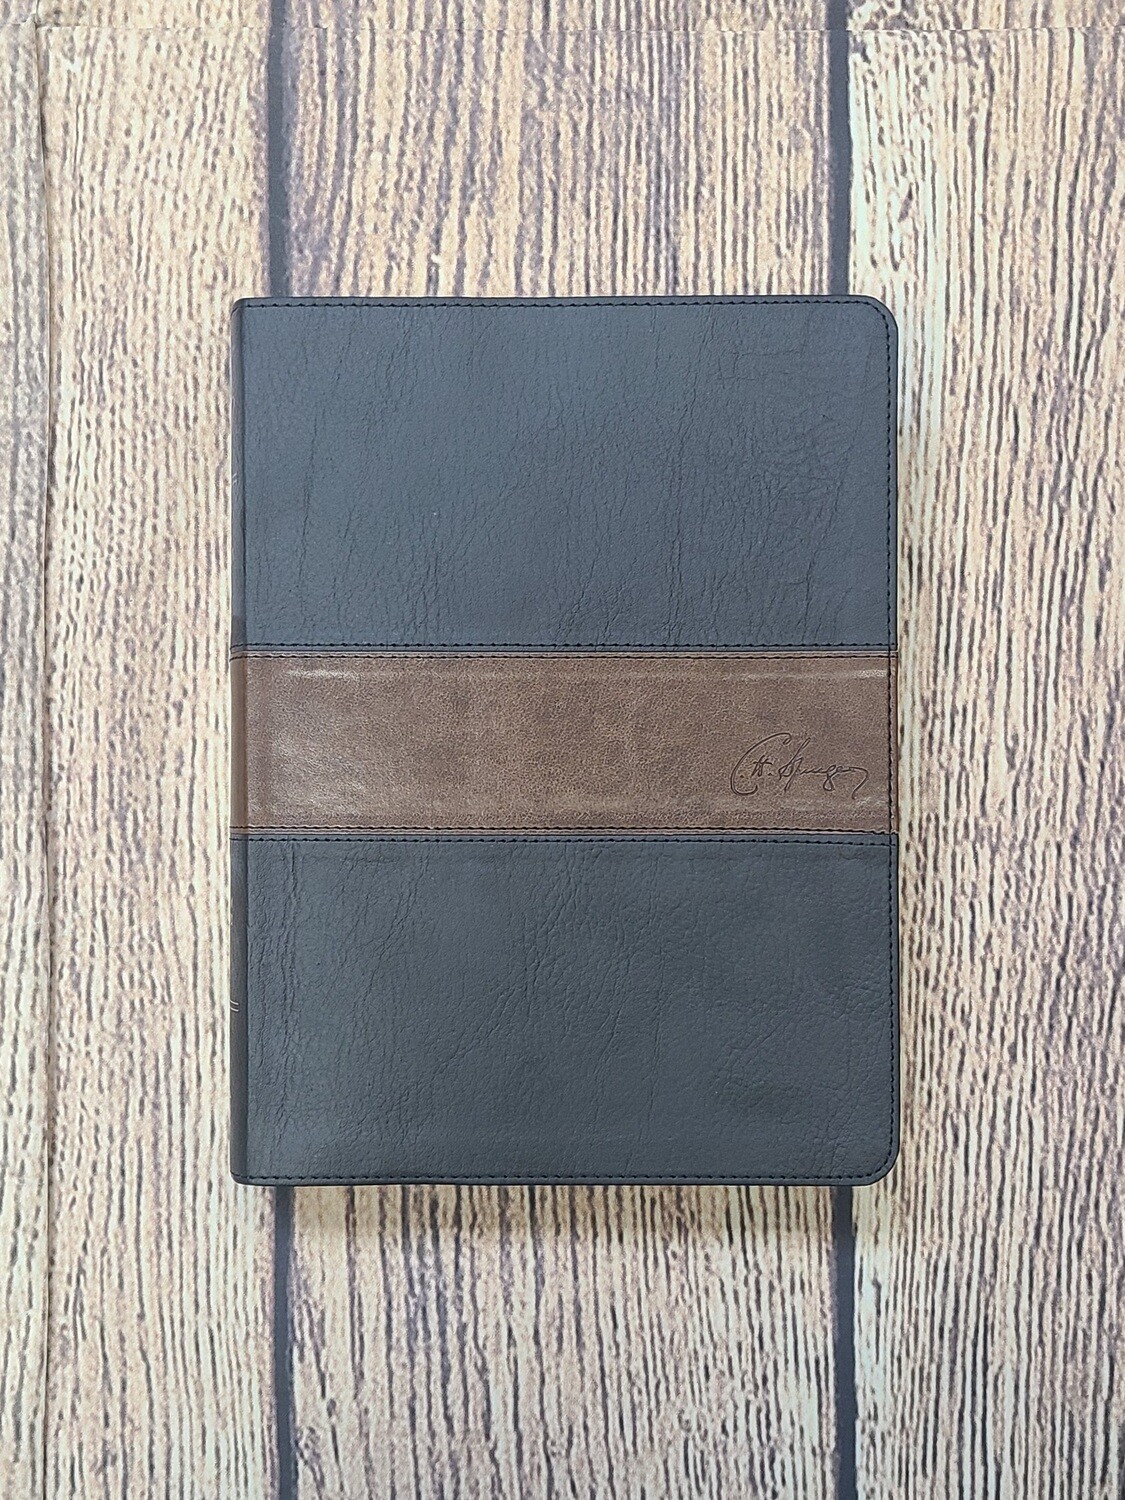 CSB Spurgeon Study Bible - Black/Brown LeatherTouch